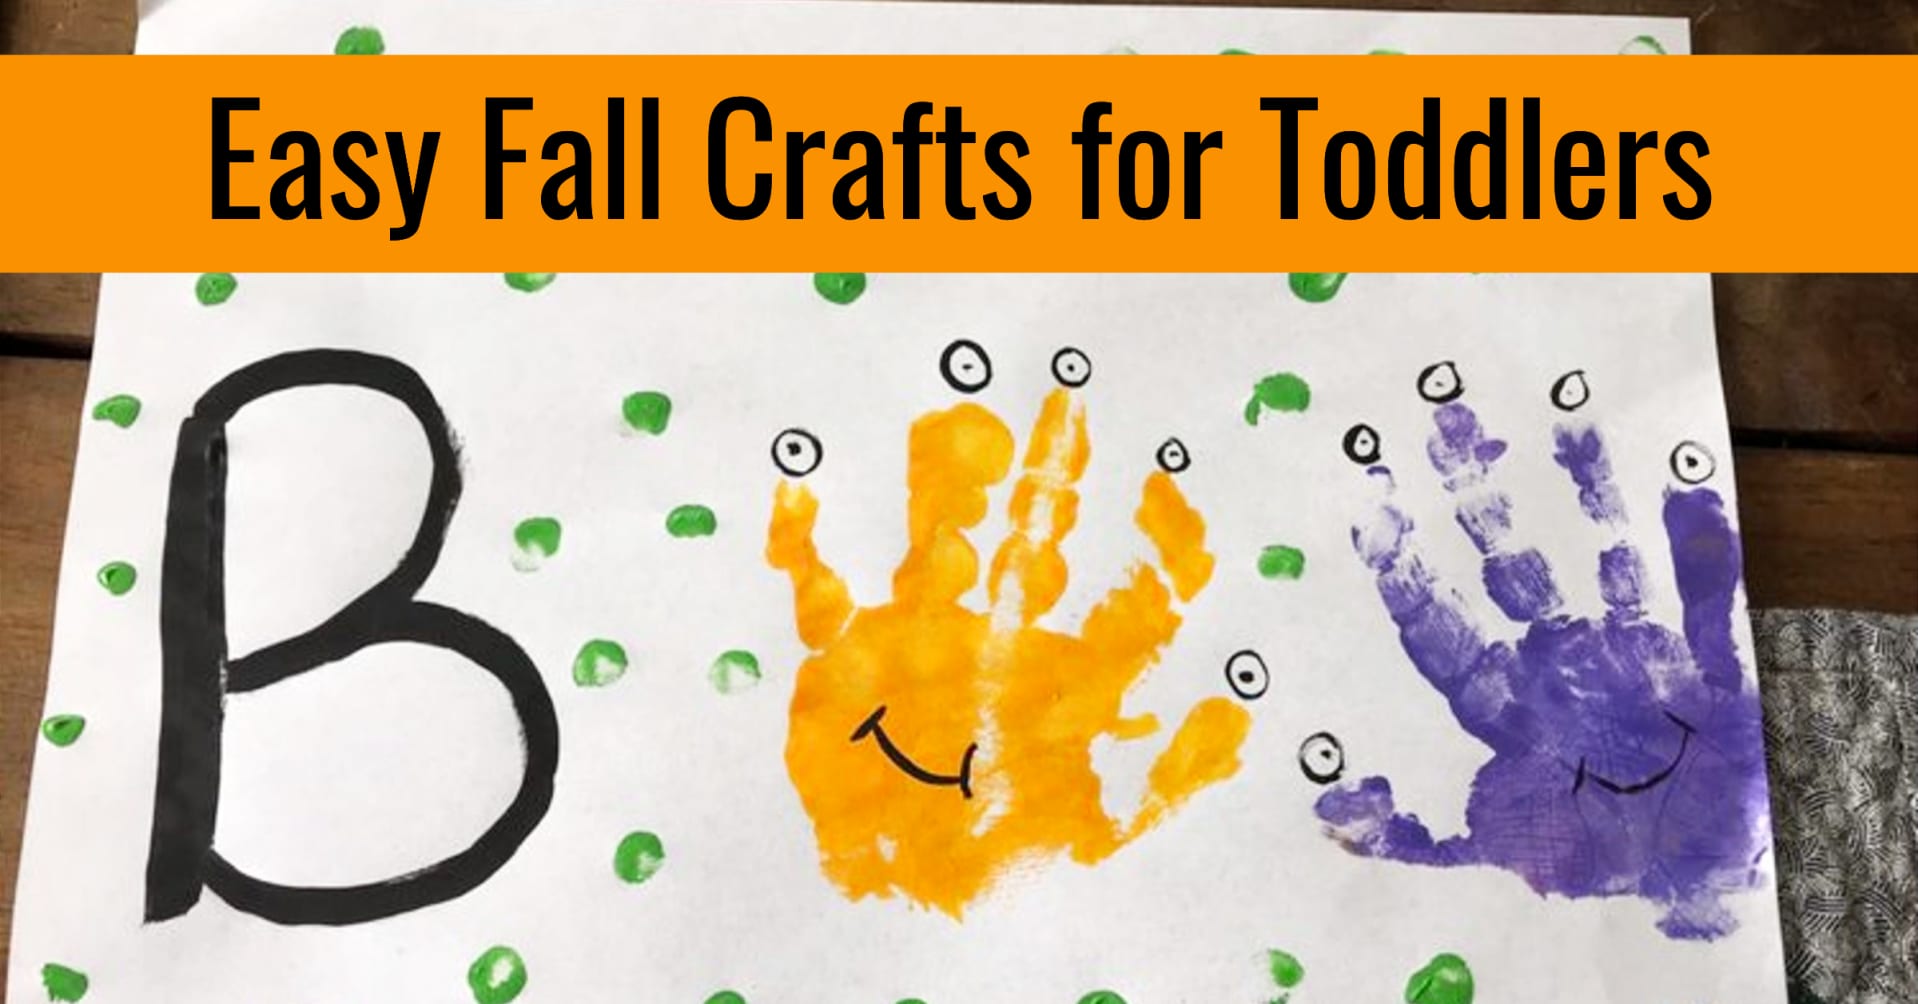 Autumn Crafts and autumn activities for toddlers - fun and easy Fall crafts for toddlers to make